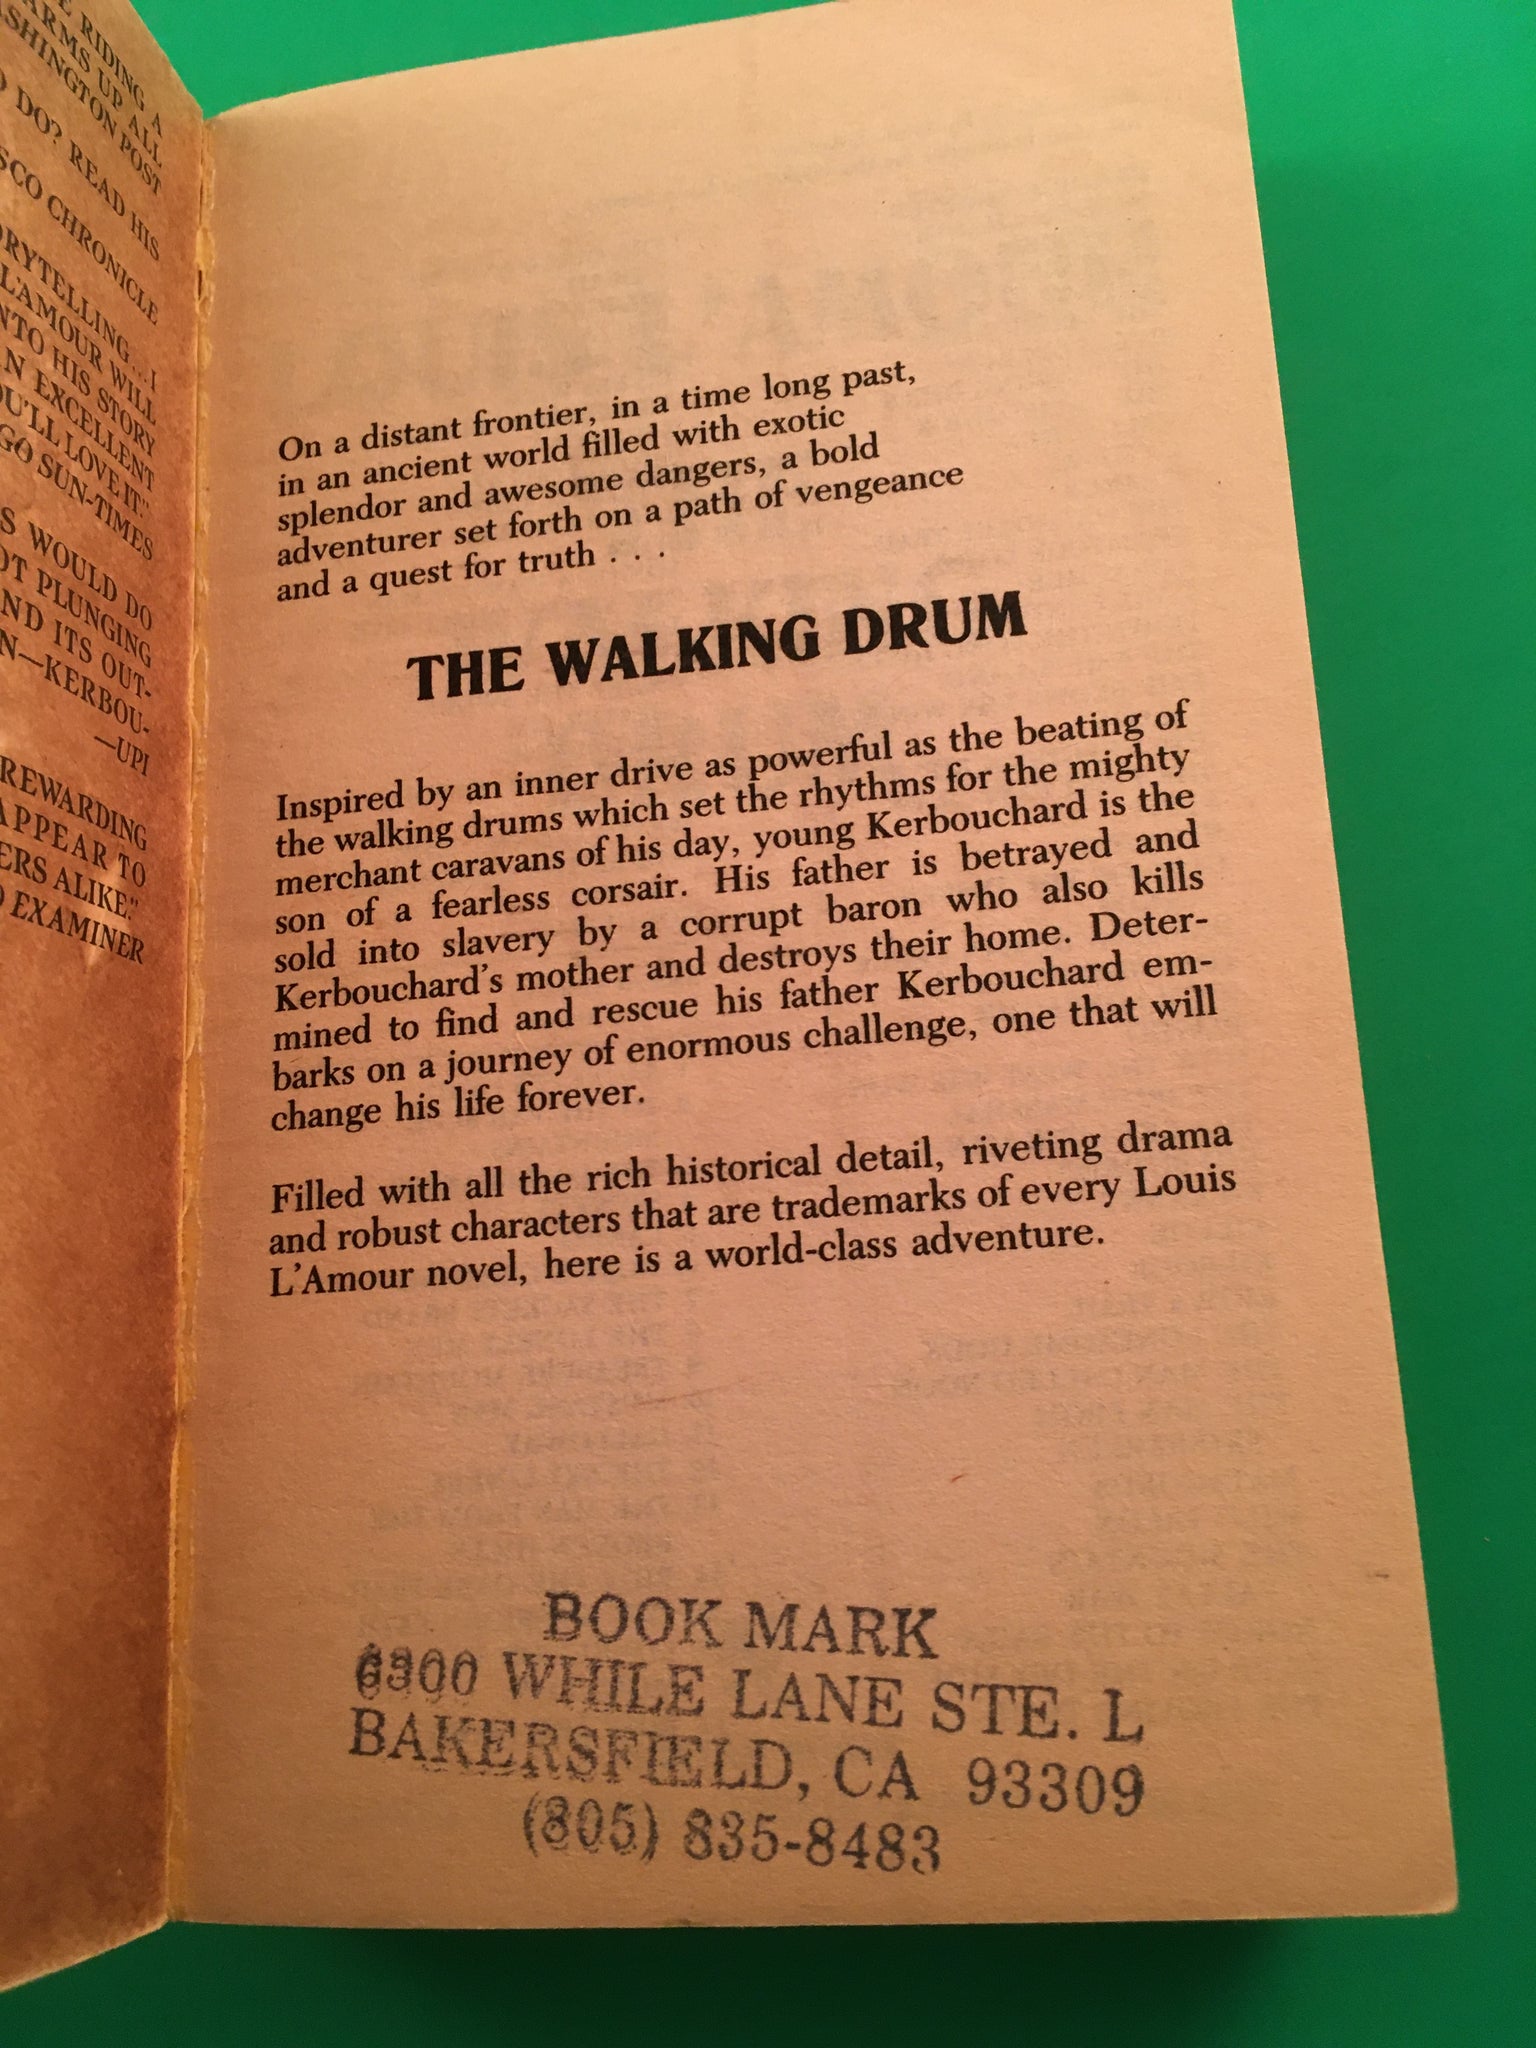 The Walking Drum by Louis L'Amour: Riveting Historical Fiction